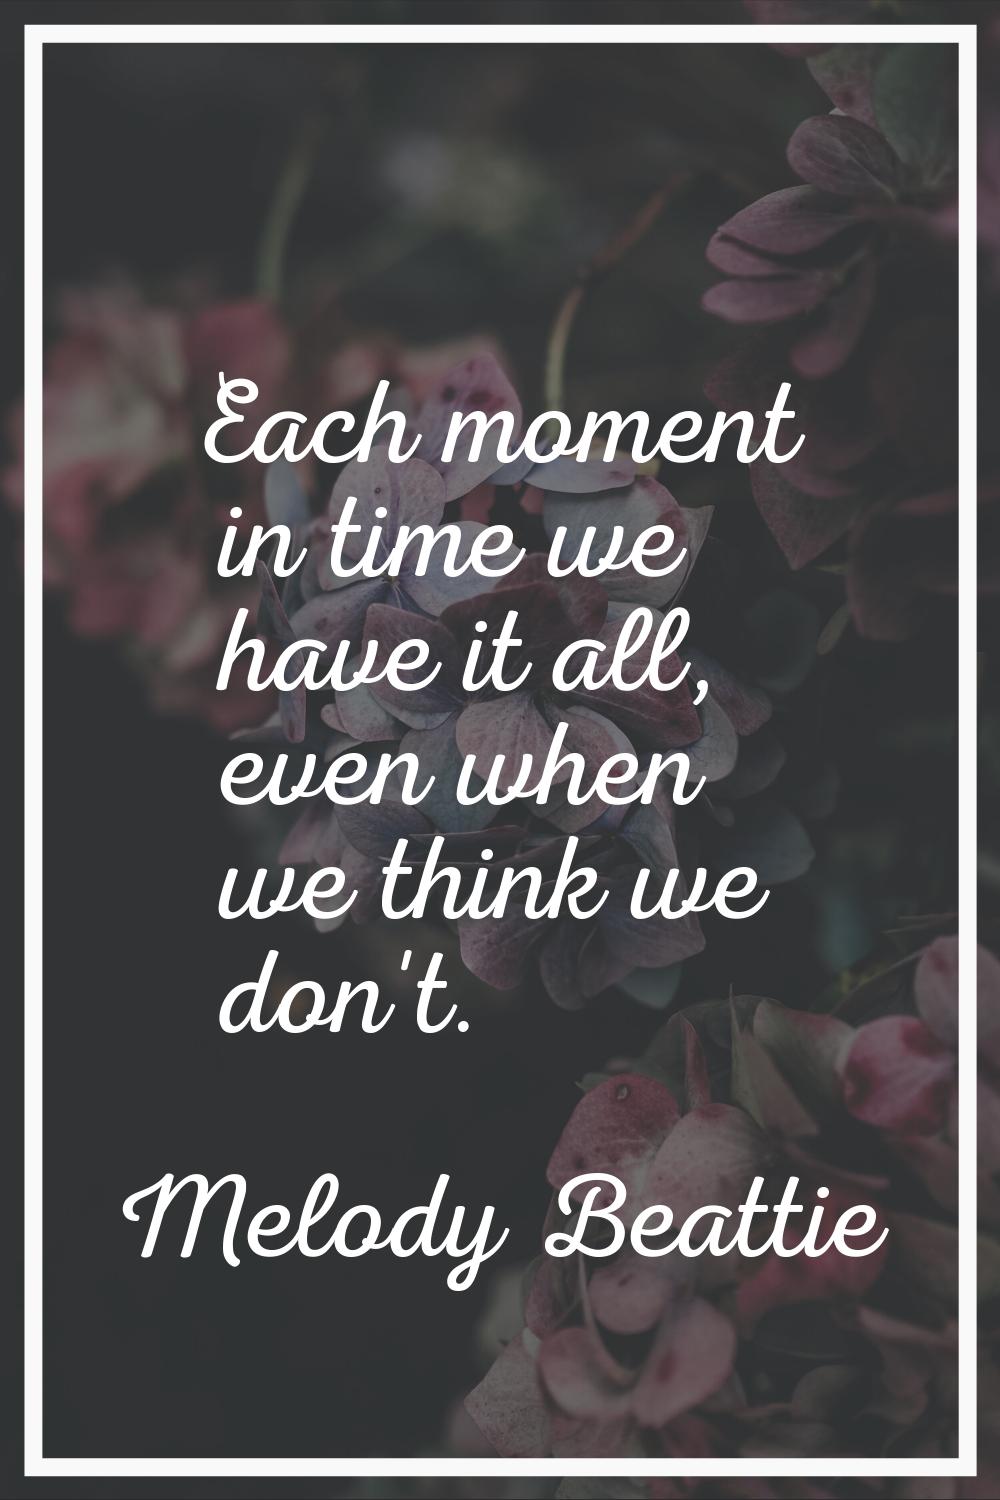 Each moment in time we have it all, even when we think we don't.